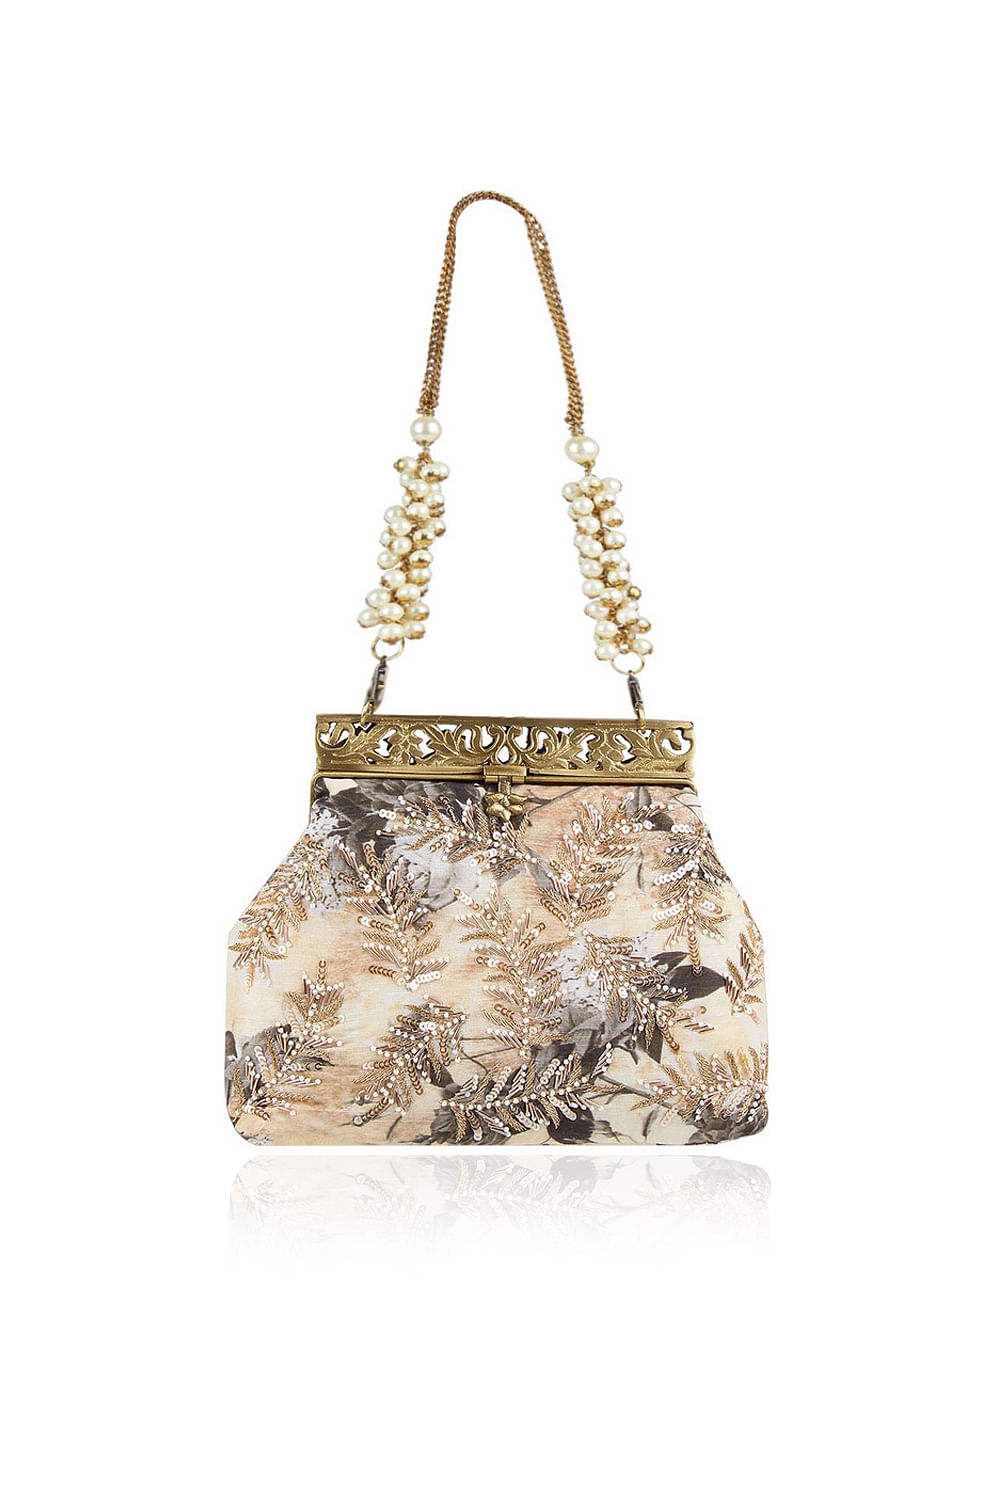 Buy Gold embellished sling bag by House of D'oro at Aashni and Co